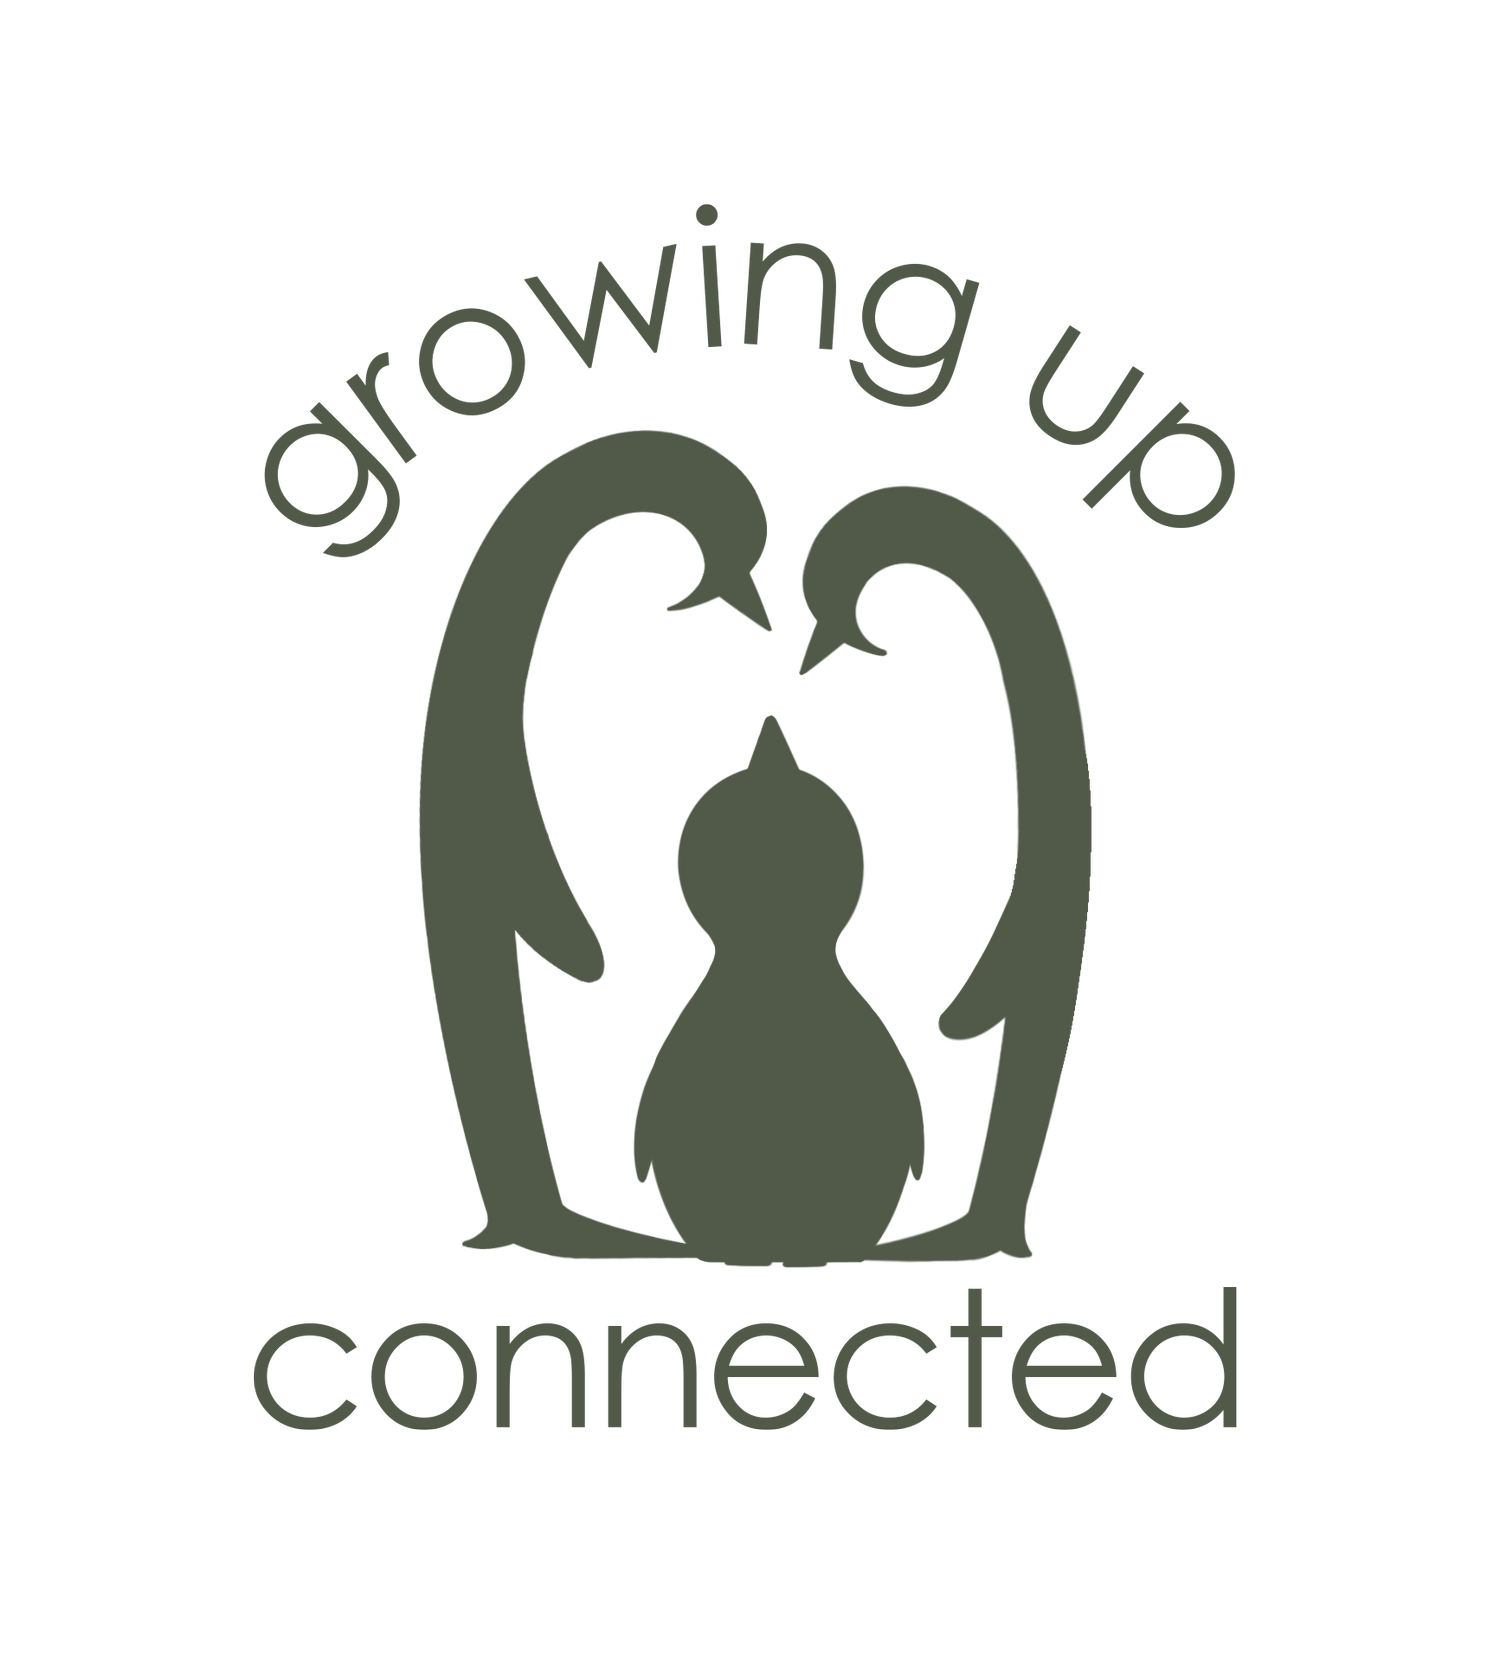 growing up connected